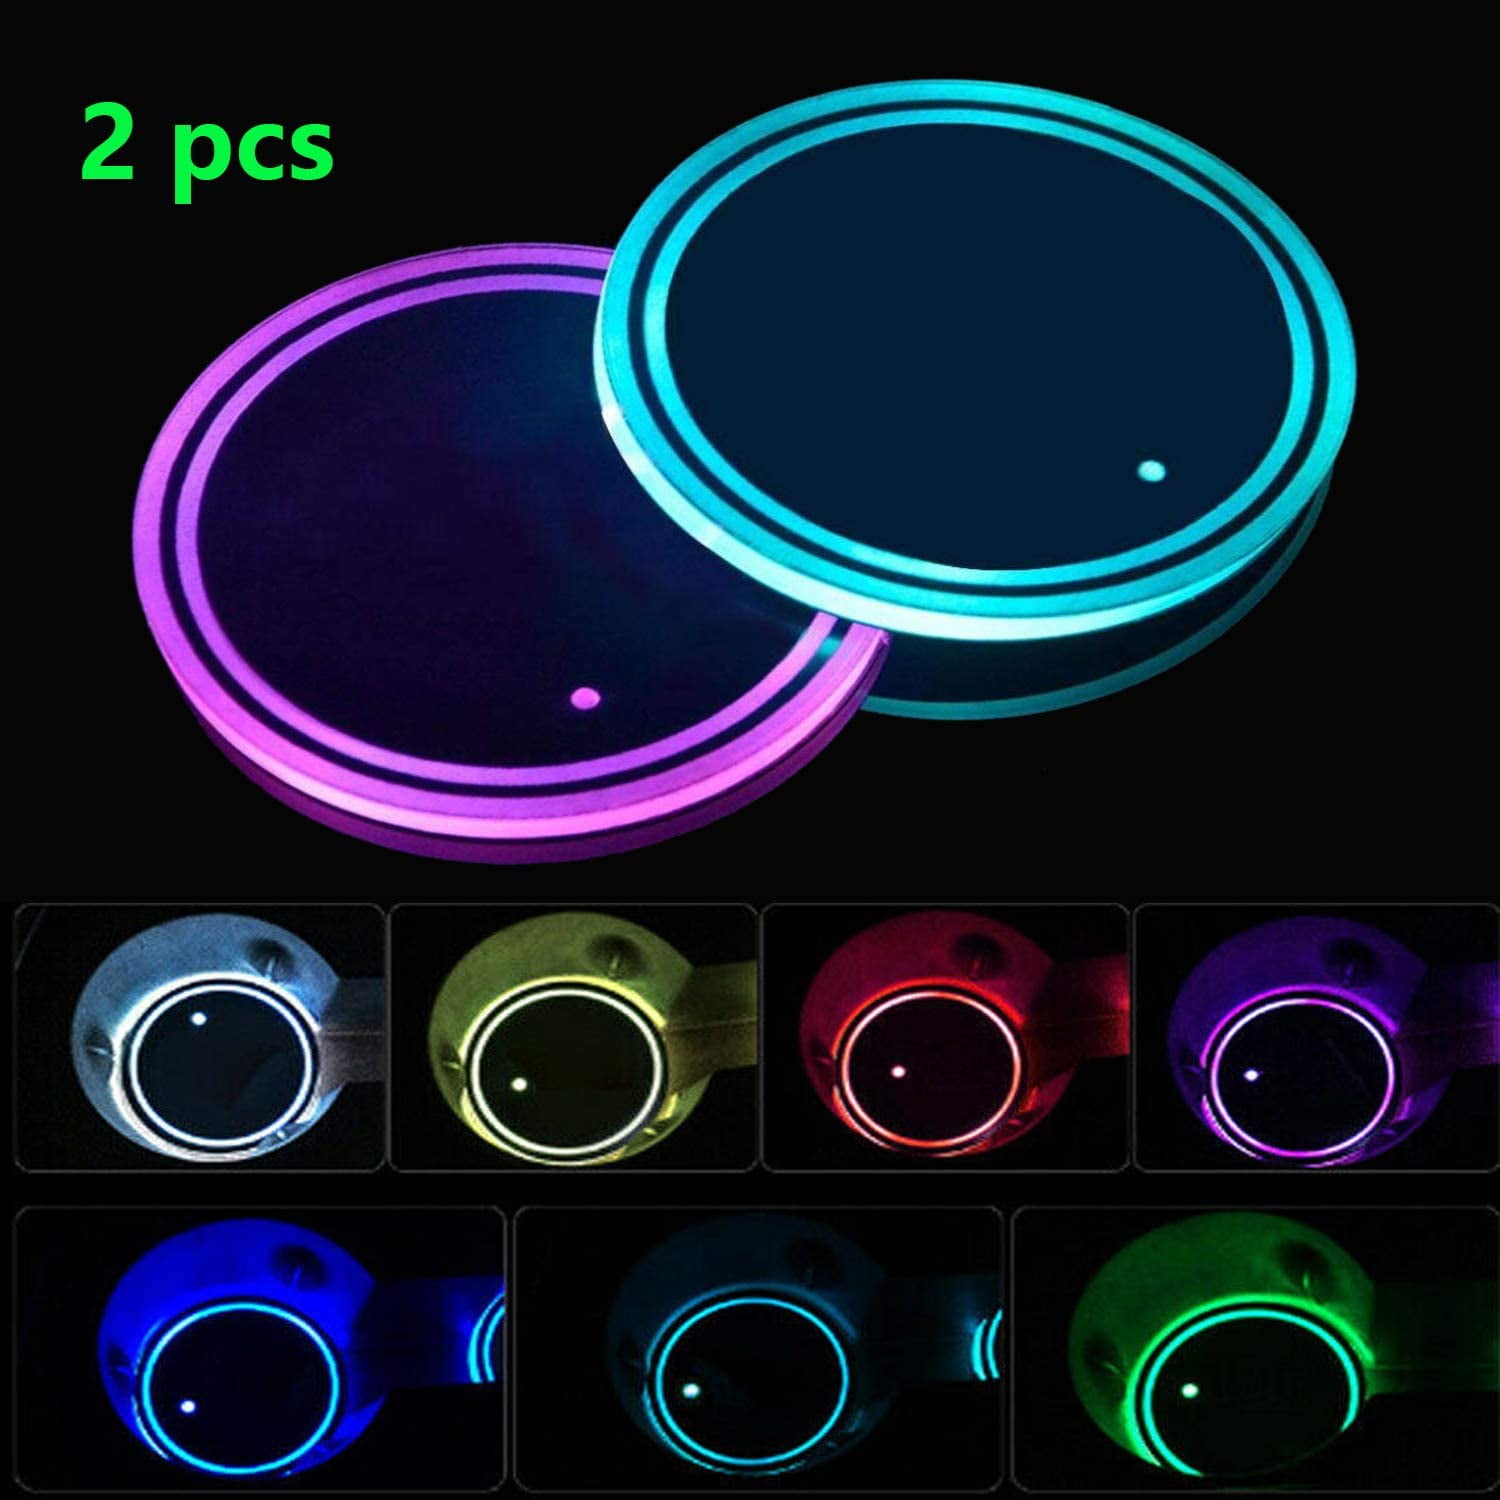 Ageis 2 pcs LED Car Logo Cup Holder Lights Coaster USB Charging 7 Colors Changing Auto Luminescent Cup Pad LED Interior Atmosphere Lamp Decoration Lights Accessories 